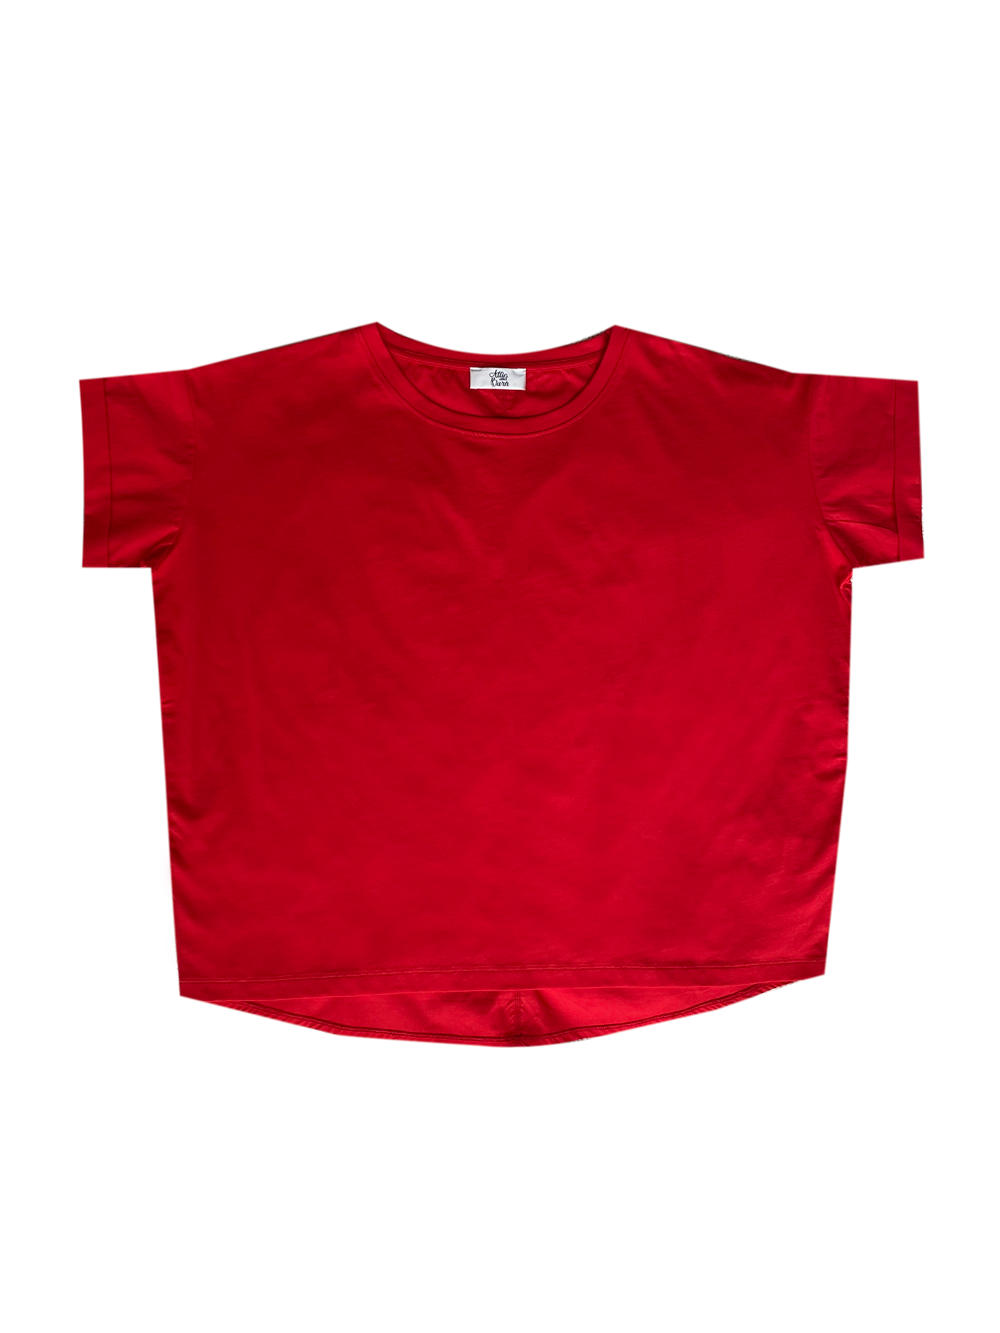 ATTIC AND BARN red oversized t-shirt